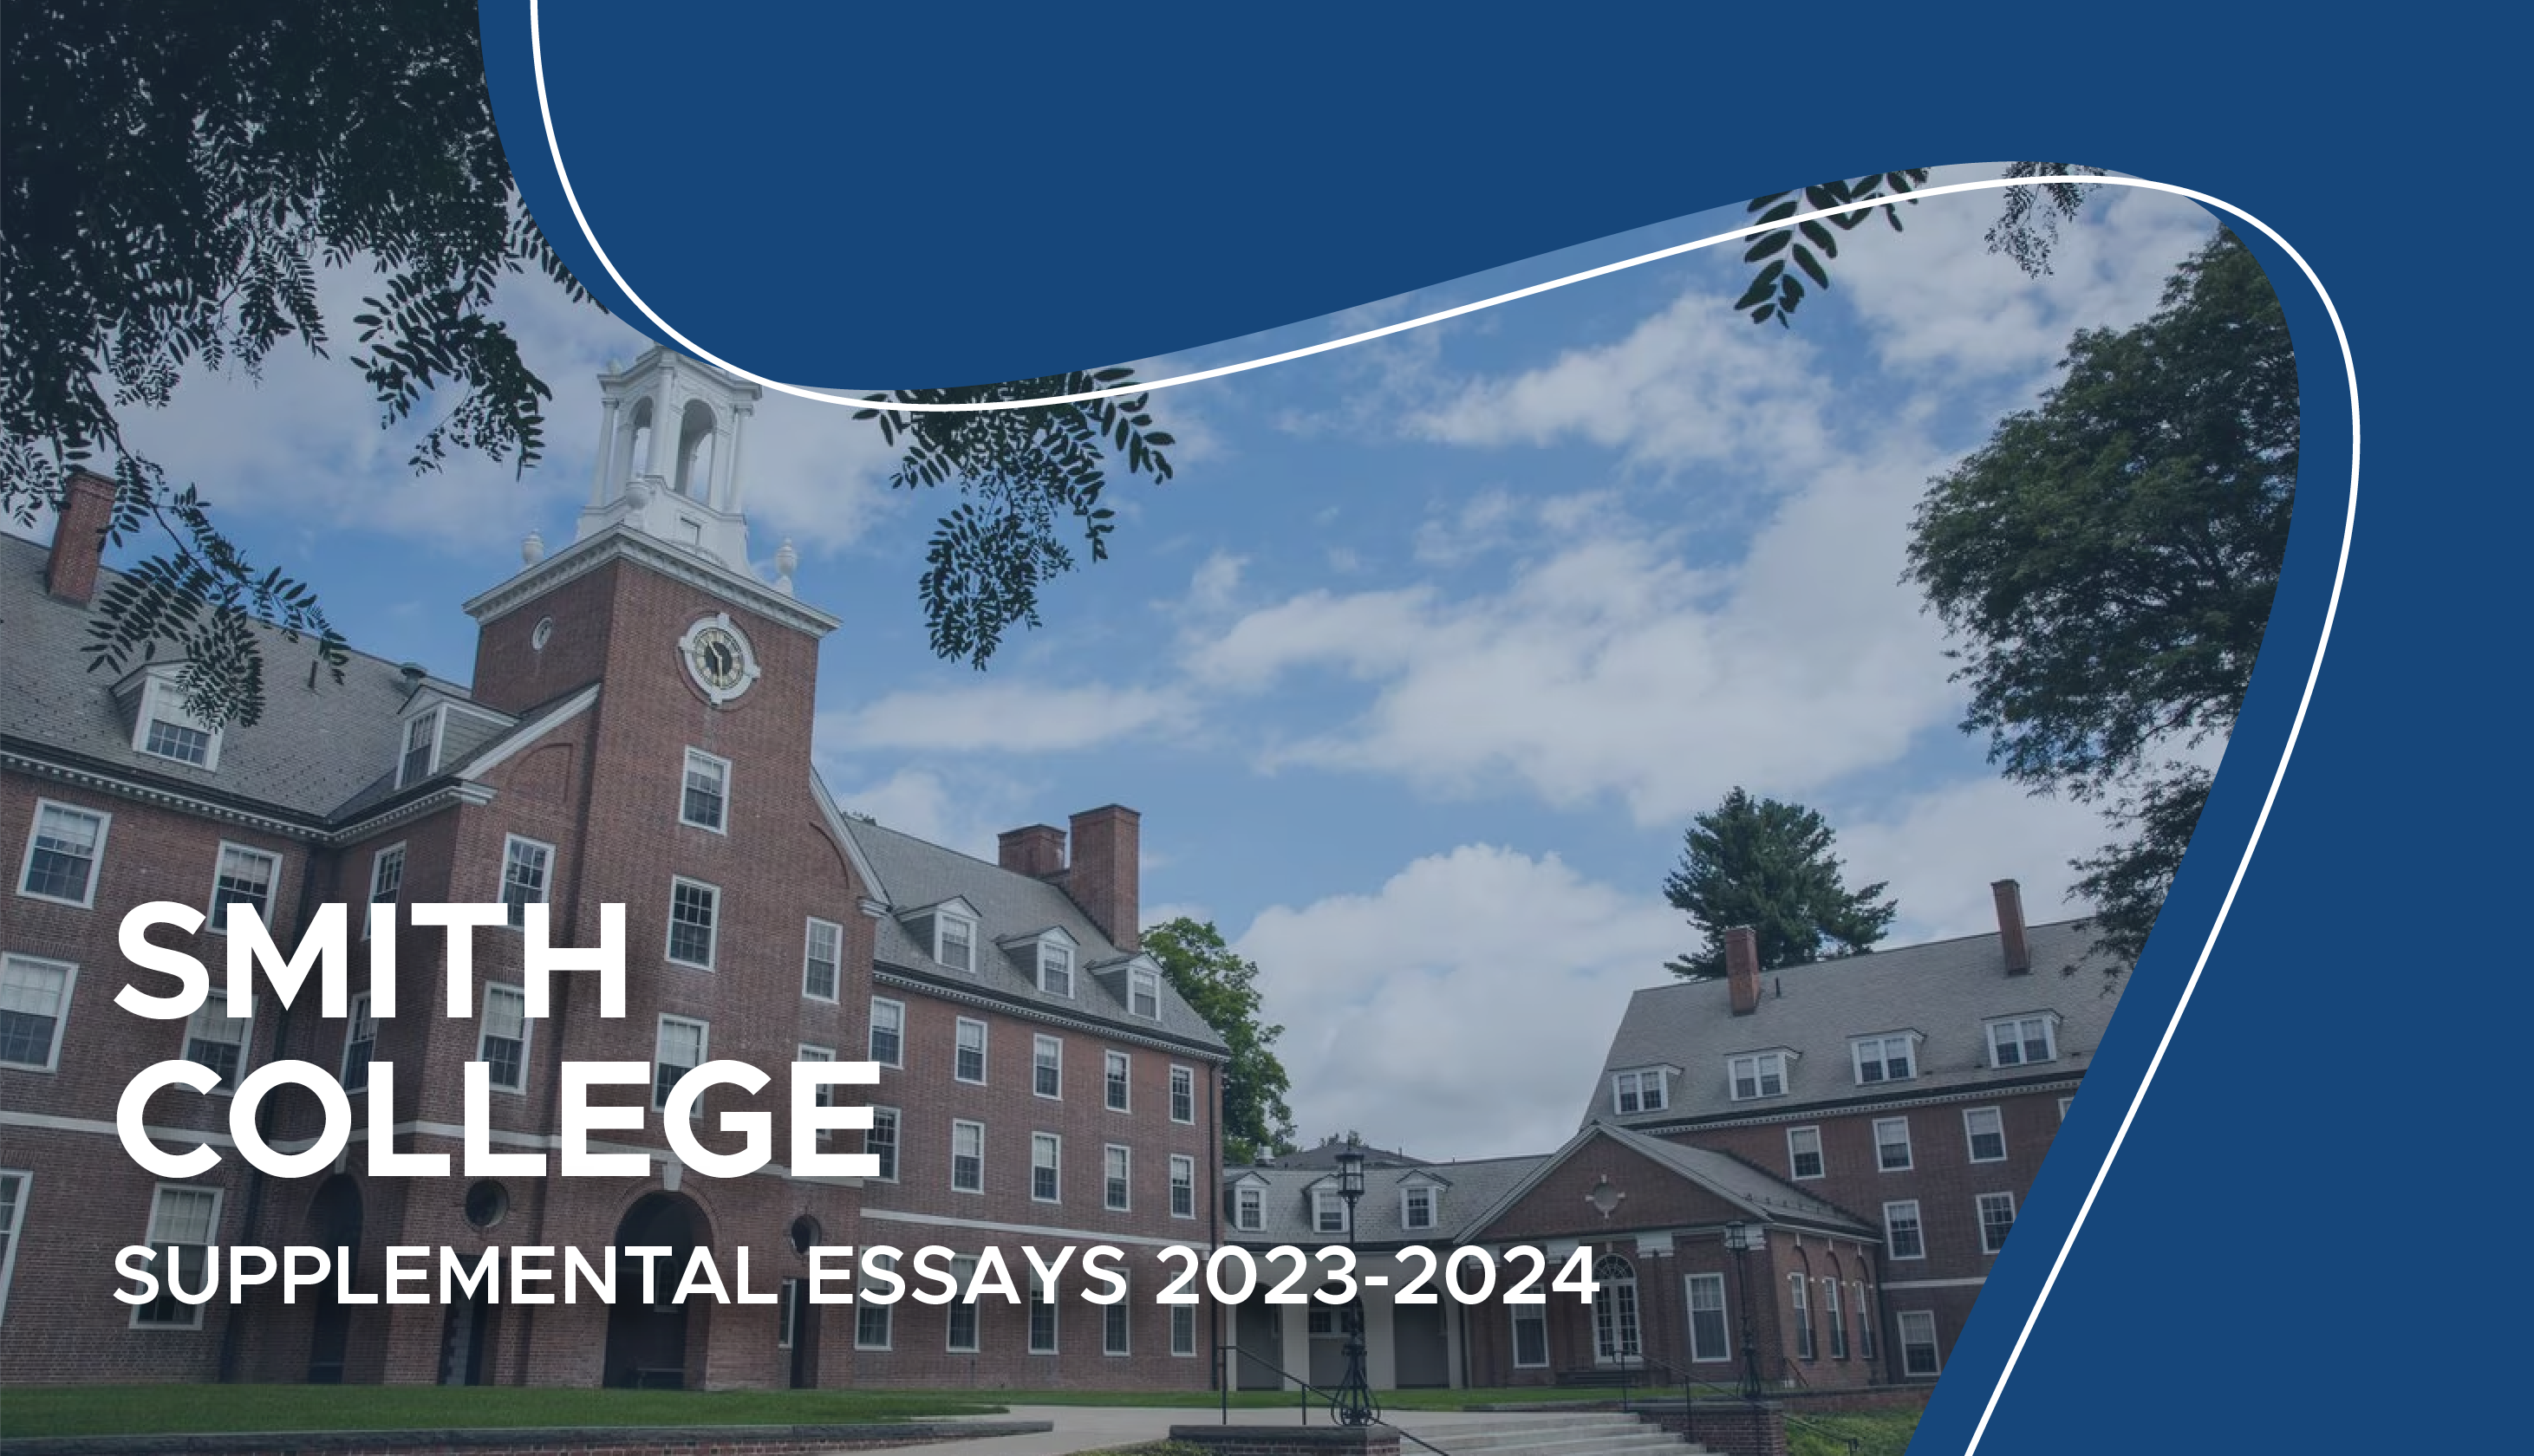 does smith college have supplemental essays 2023